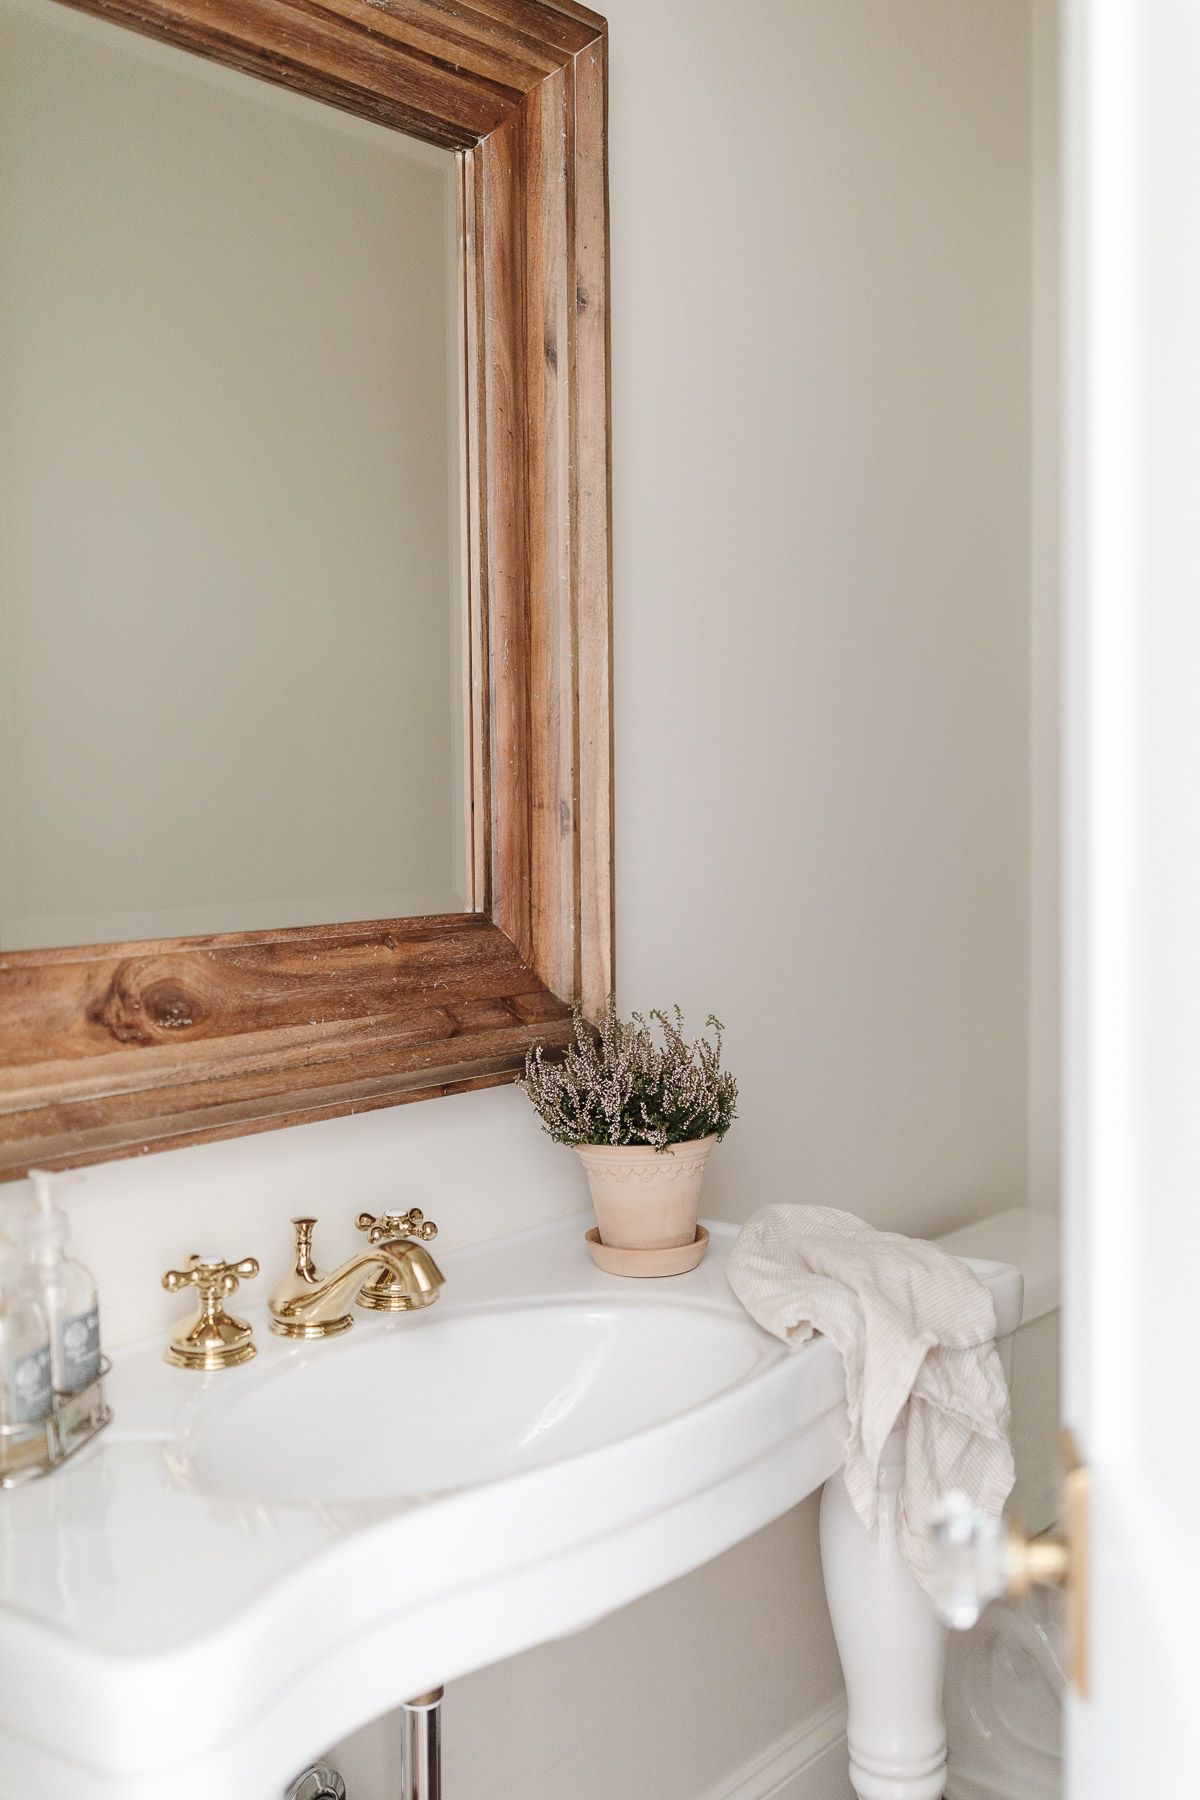 A guest bath with a wooden framed mirror and brass faucet.